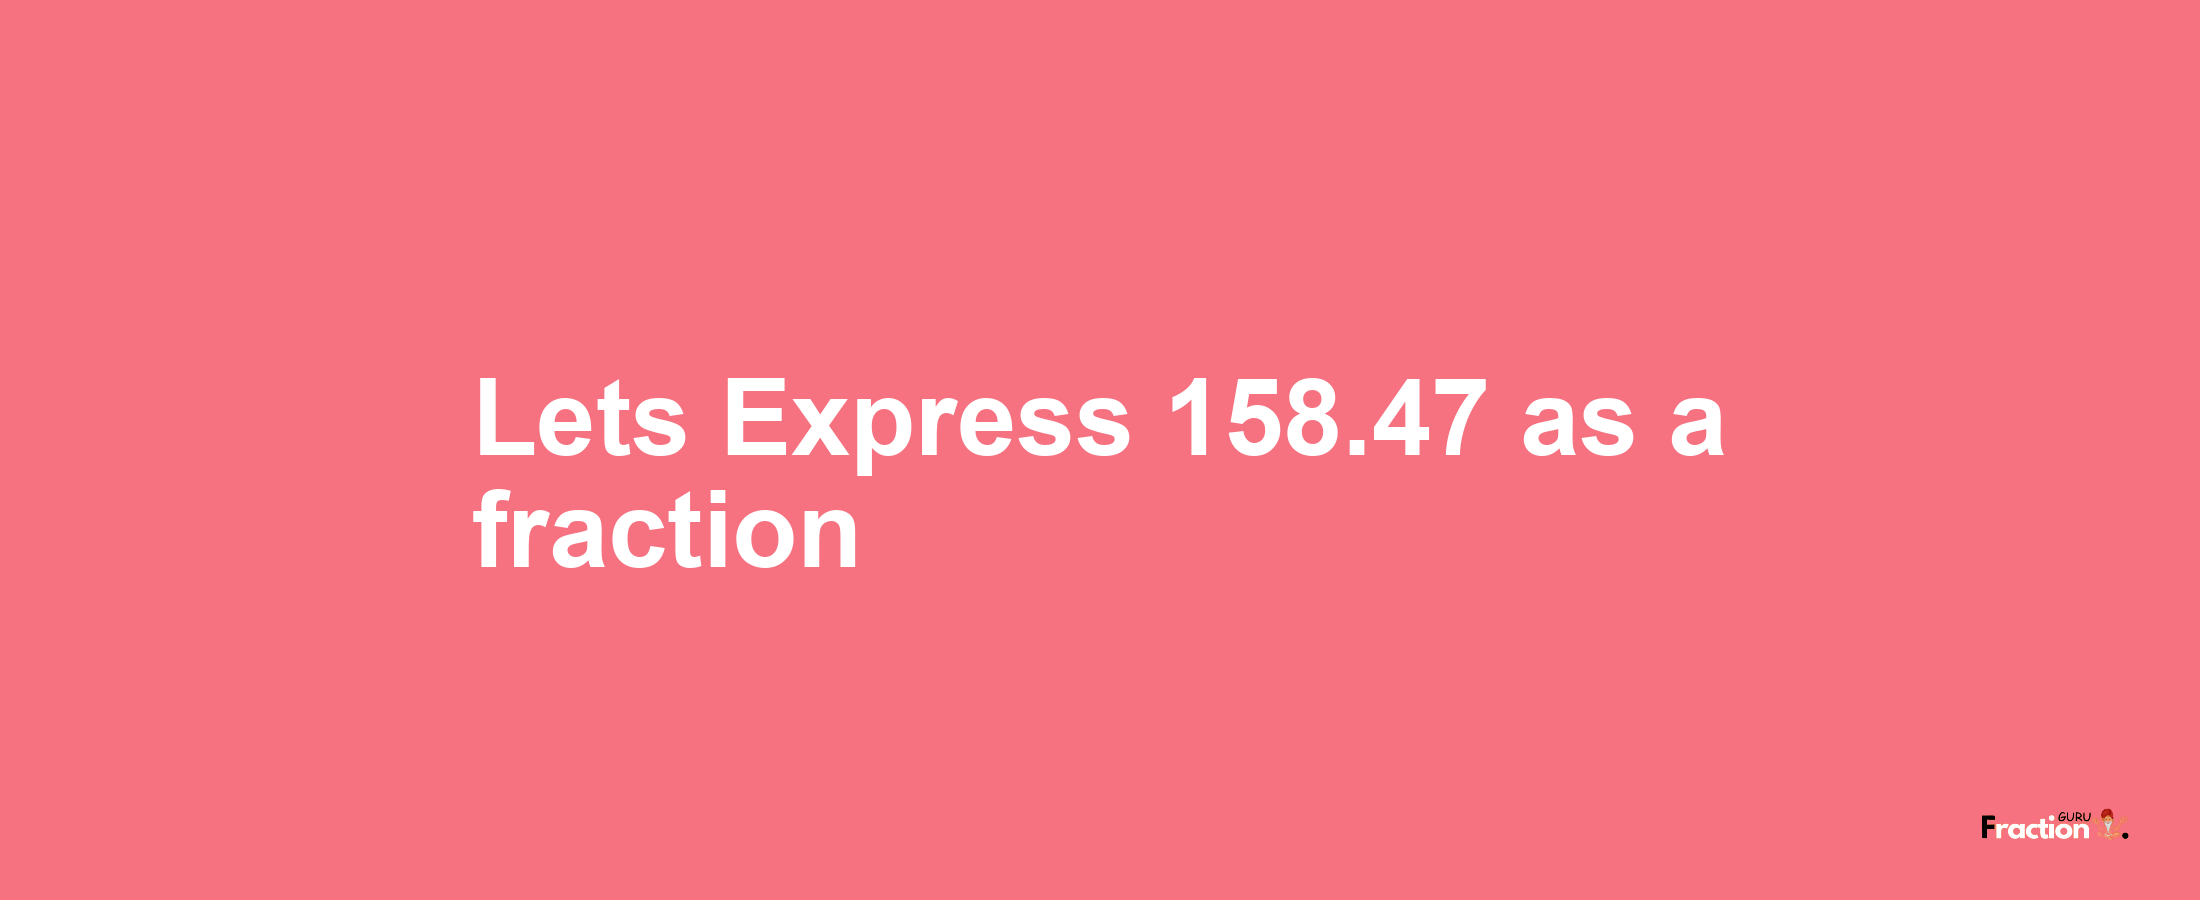 Lets Express 158.47 as afraction